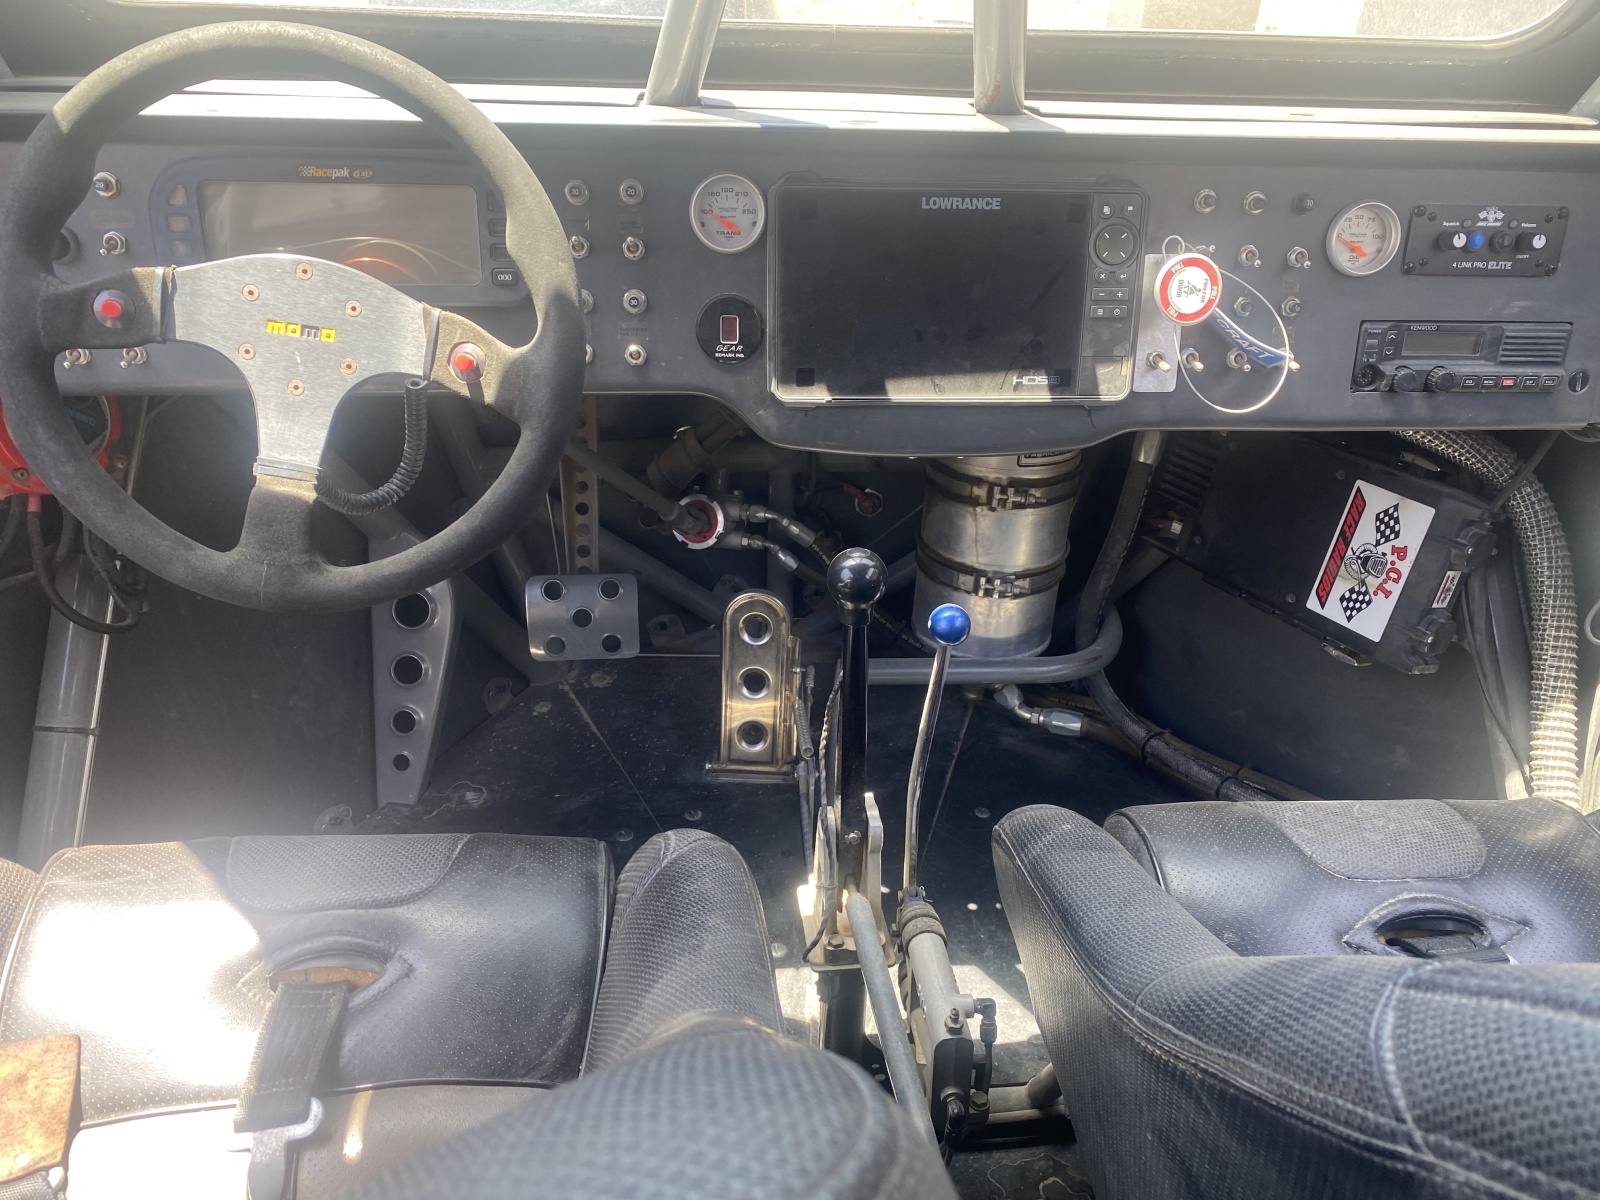 For Sale: Racer Engineering Prerunner (4 seat), Class 1 car - photo15